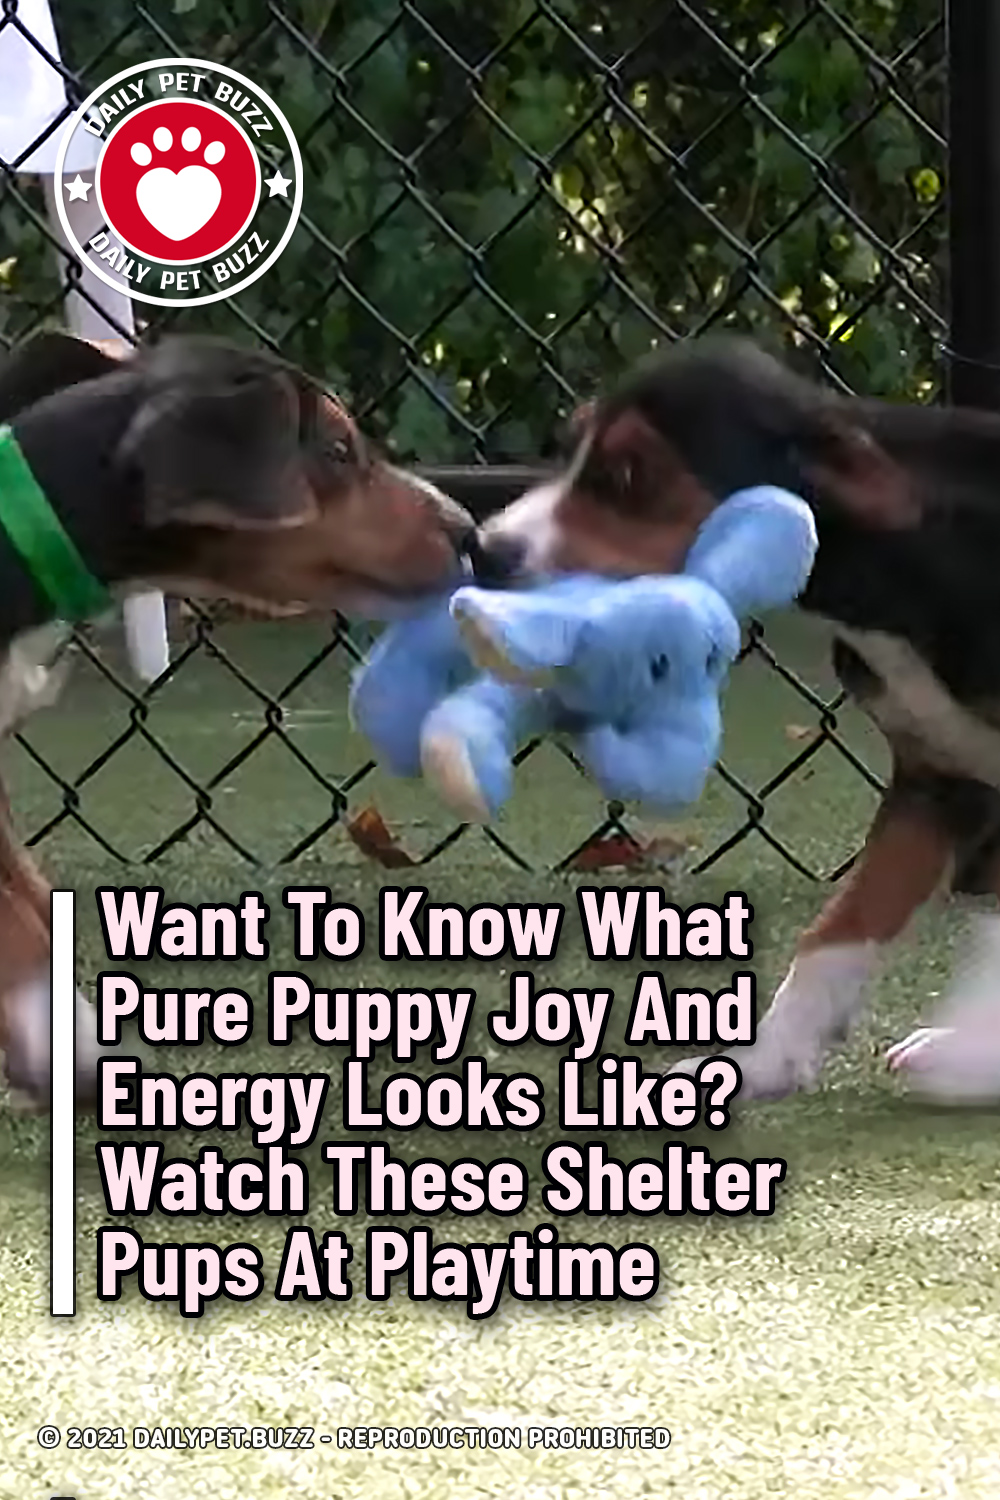 Want To Know What Pure Puppy Joy And Energy Looks Like? Watch These Shelter Pups At Playtime